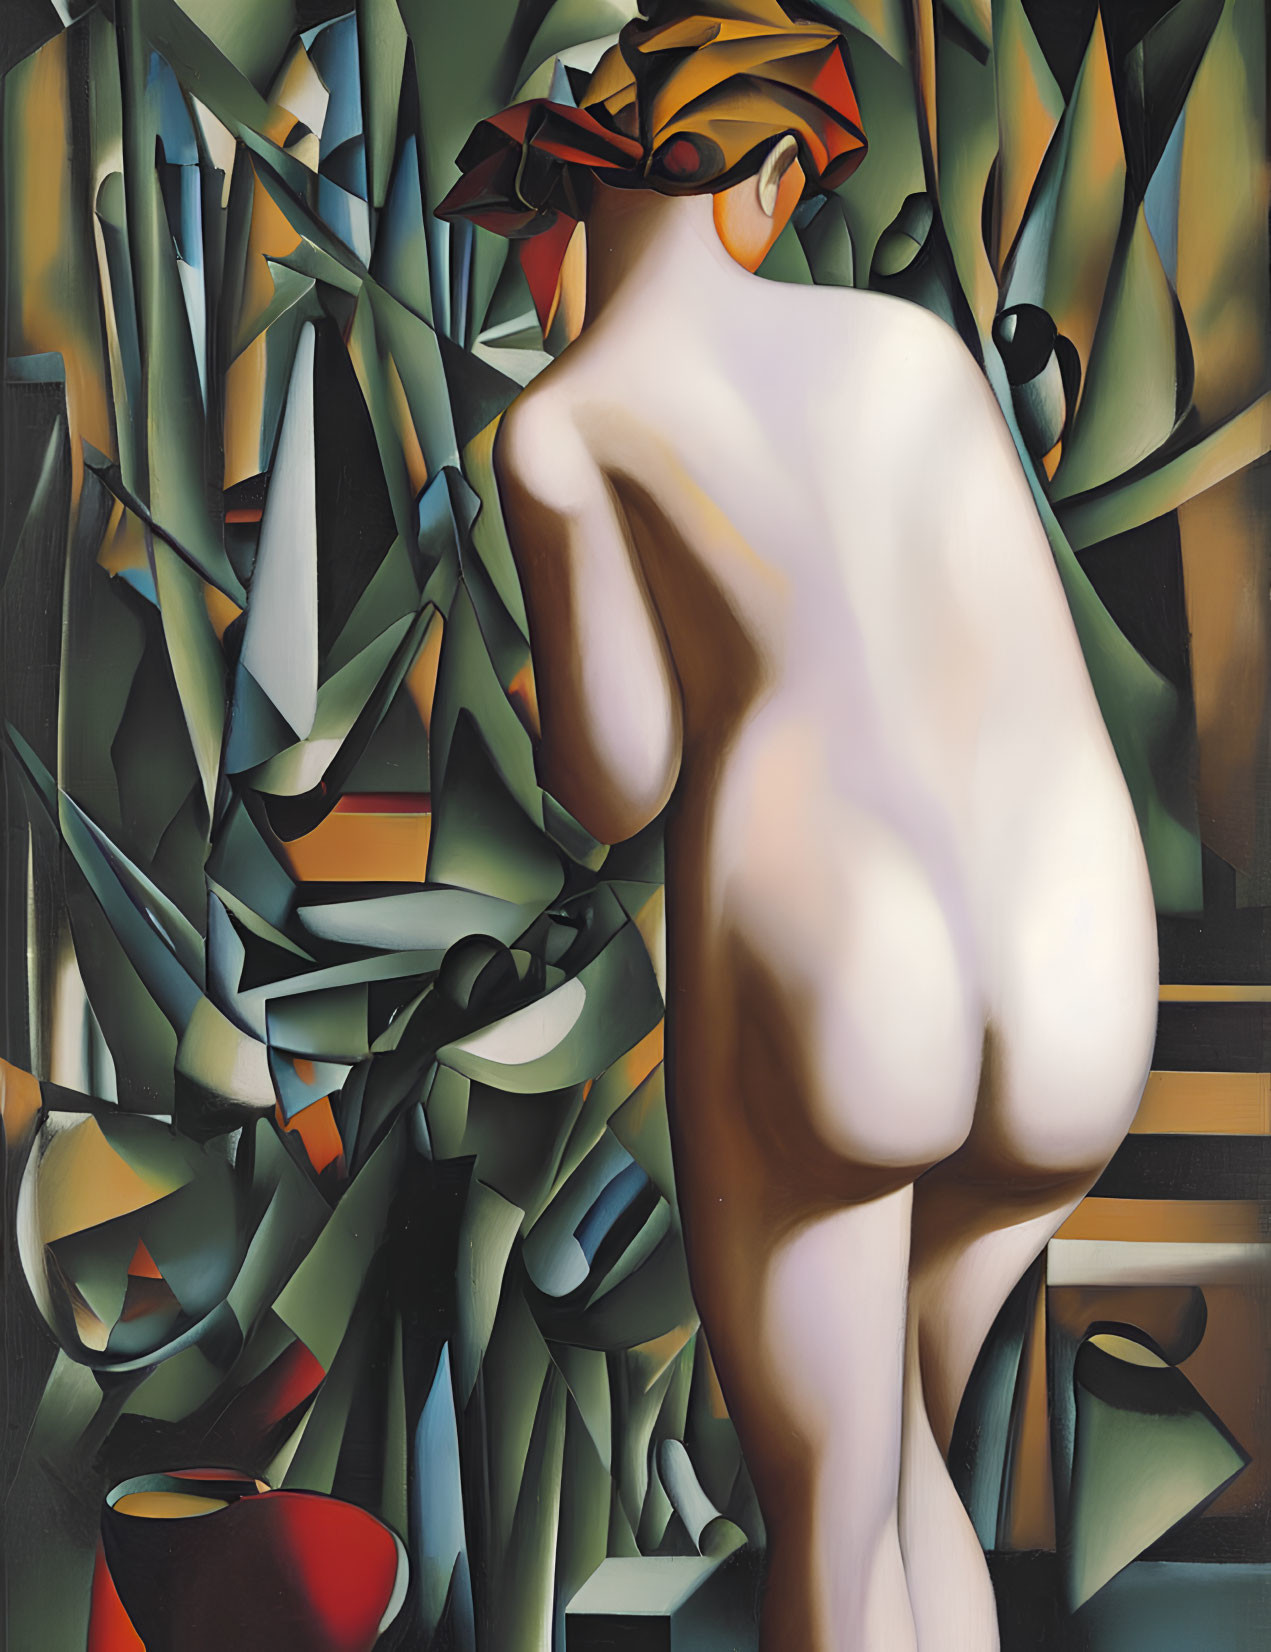 Cubist Painting: Nude Figure with Abstract Geometric Background